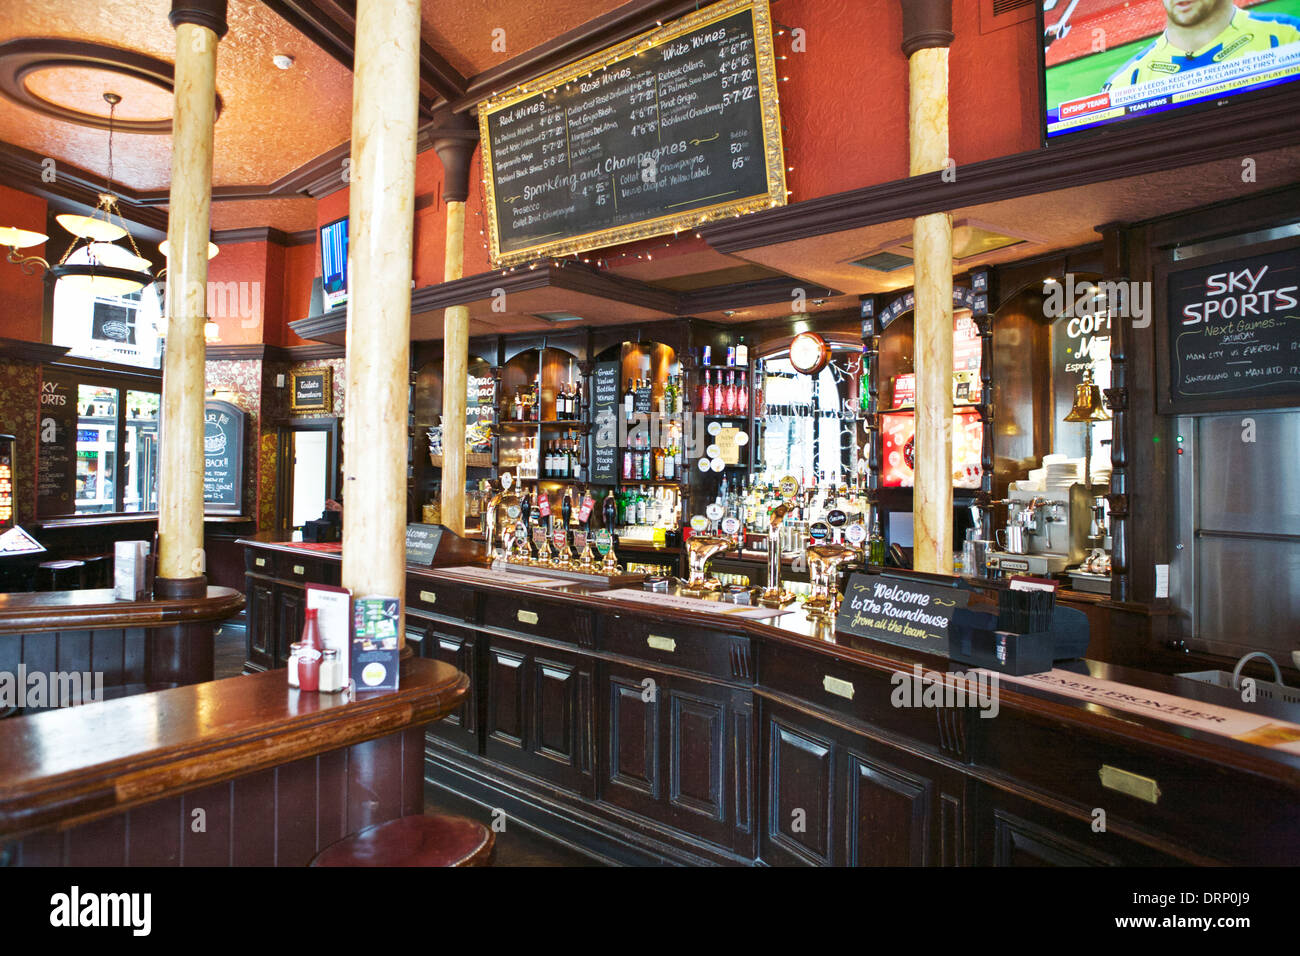 The Round House pub, 1 Garrick Street, Covent Garden, London, UK. View of the interior bar and beer taps. English pub interior. London pub bar. Stock Photo